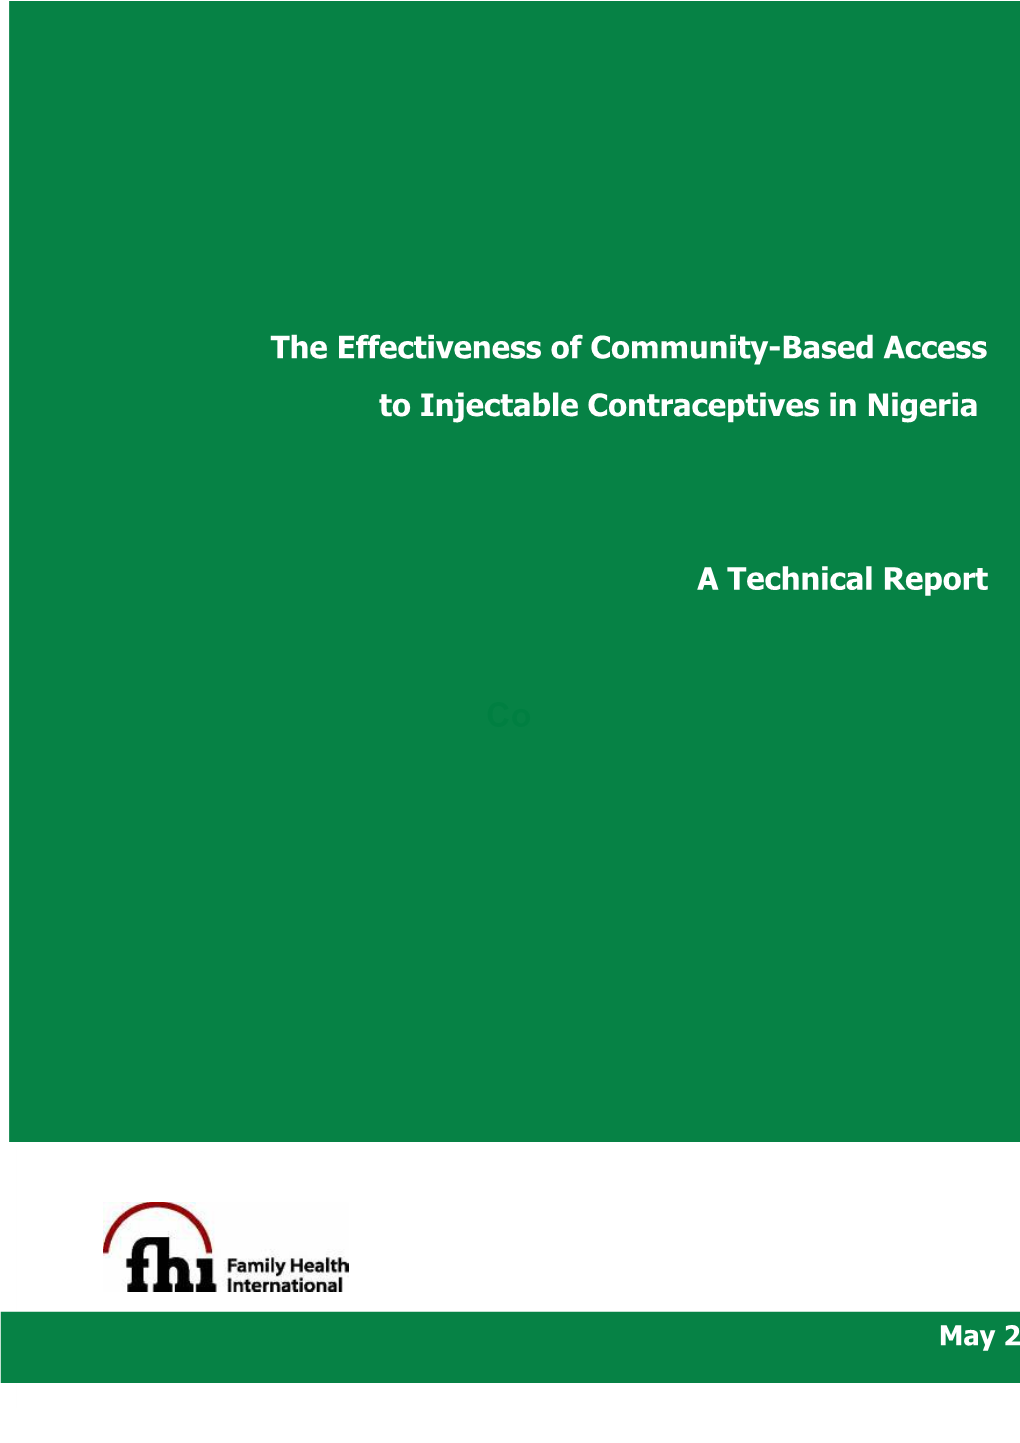 Community Based Access to Injectable Contraceptives: a Technical Report